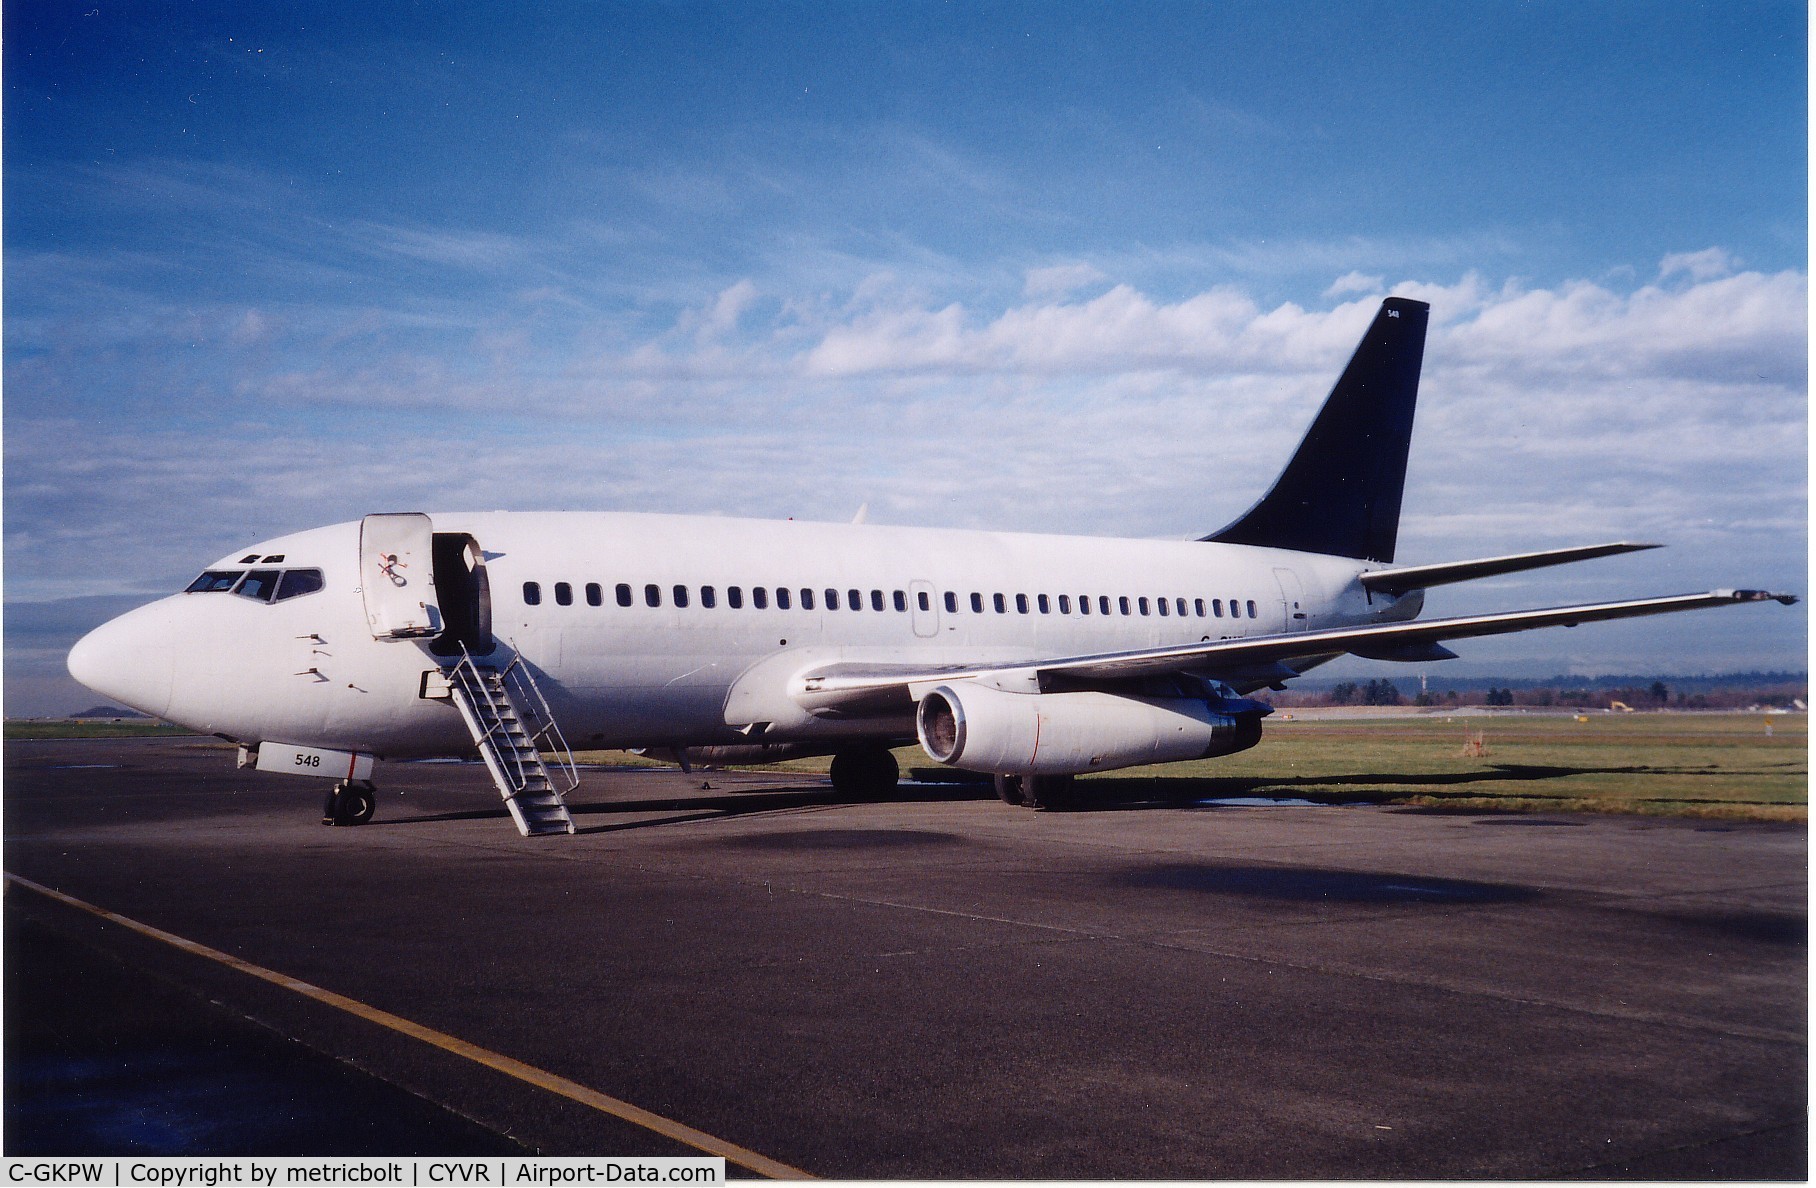 C-GKPW, 1980 Boeing 737-275 C/N 21819, Devoid of tail logo and titles in Jan.2003